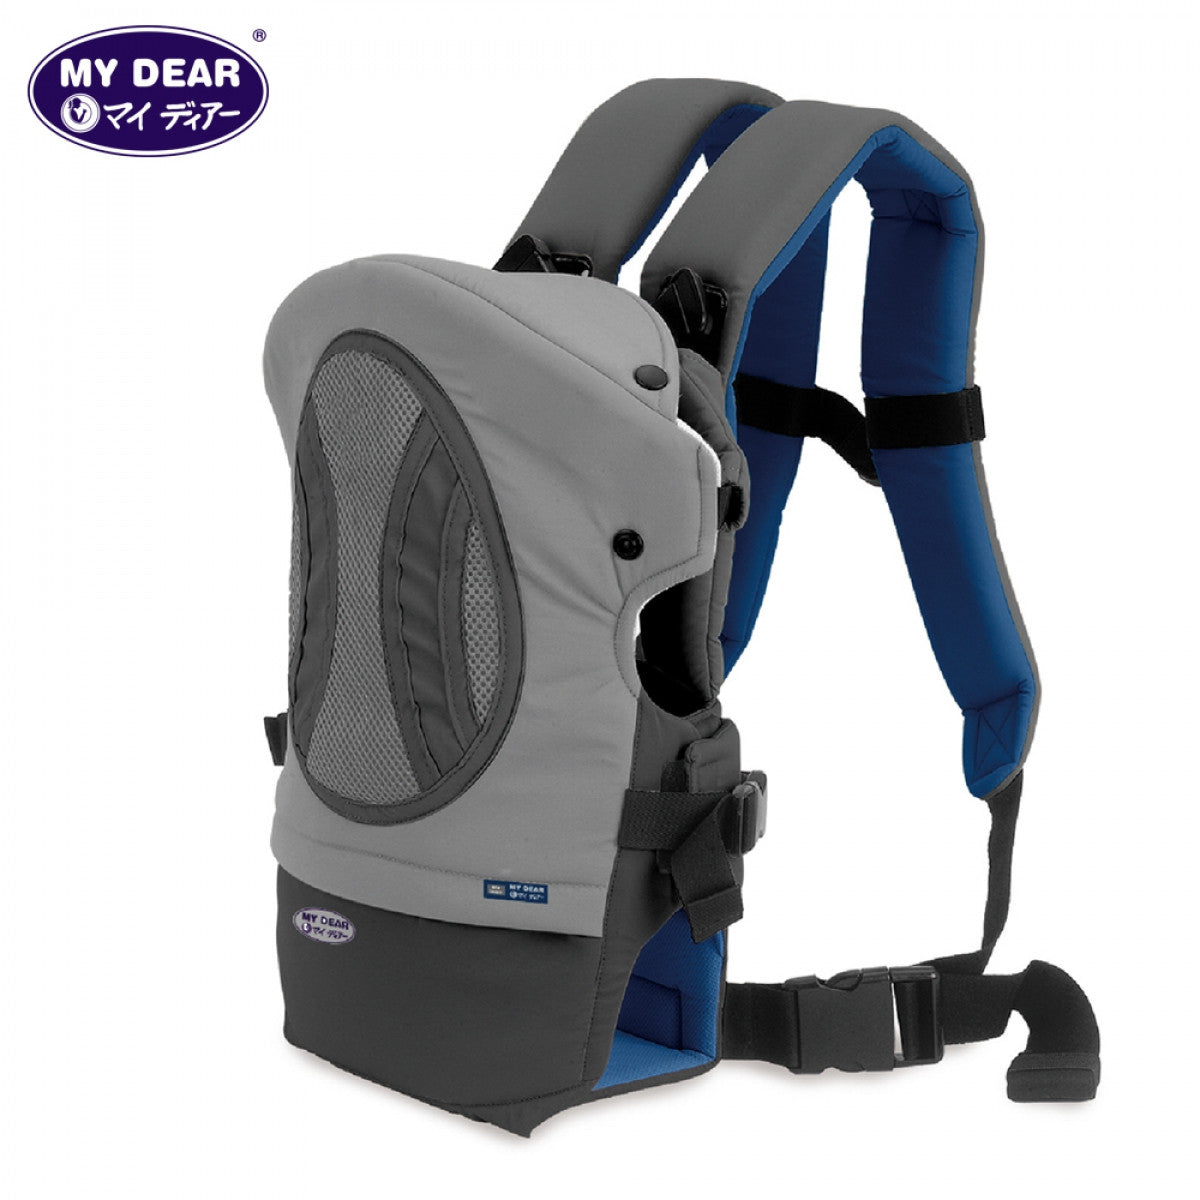 My Dear Baby Soft Carrier 28025 With Adjustable Strap, Quick Buckle Lock & Removable Hard Cover